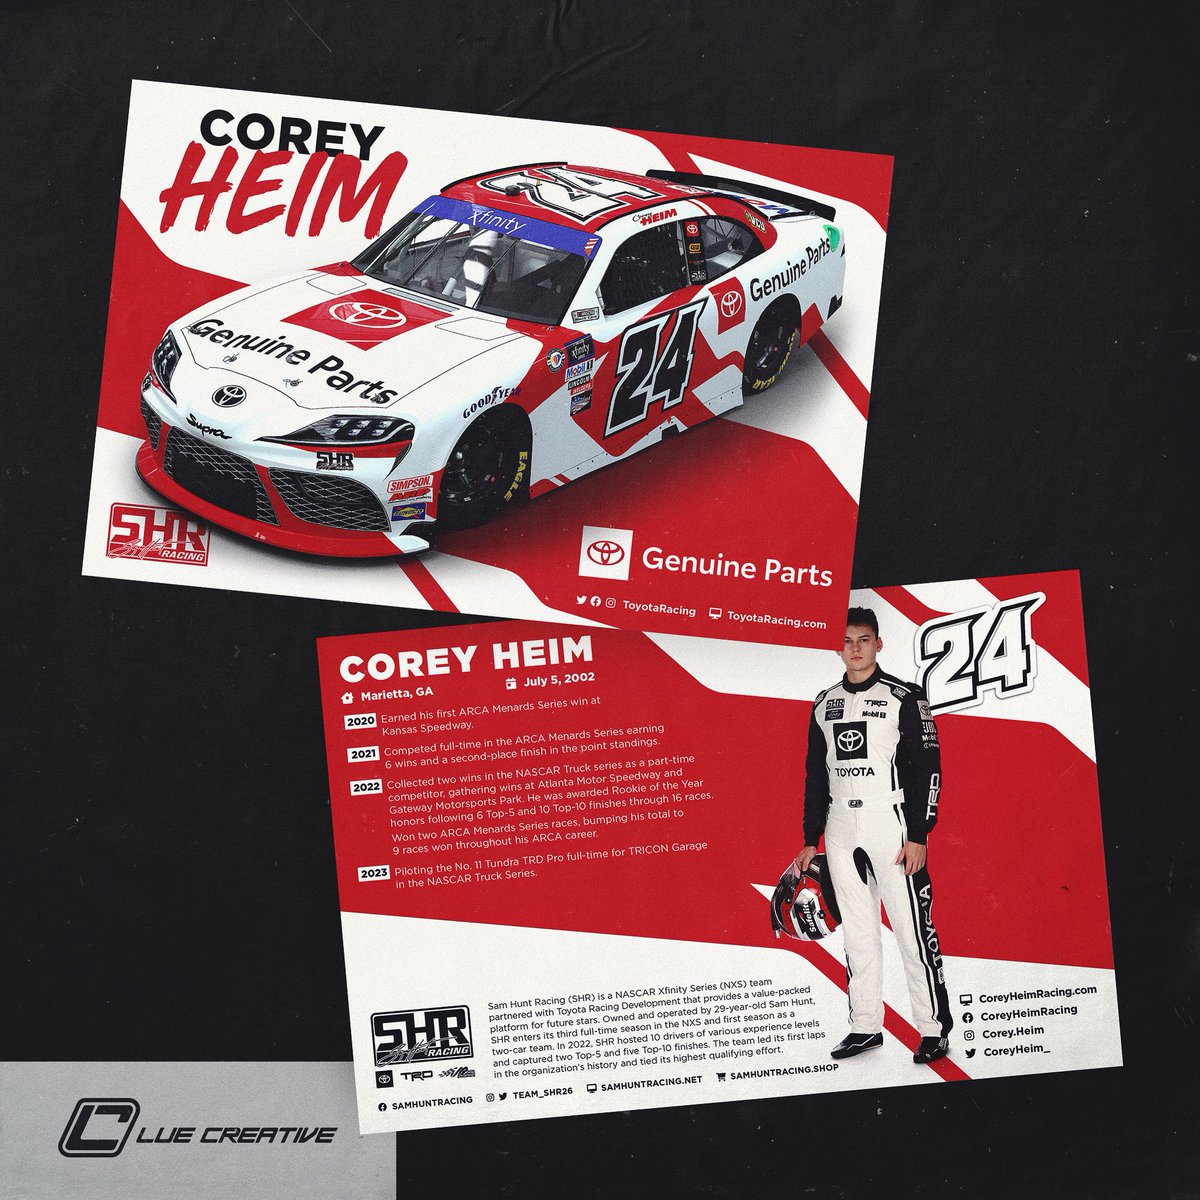 Check out the @Toyota Genuine Parts hero card we created for @CoreyHeim_’s @NASCAR_Xfinity debut with @Team_SHR26 at the @MonsterMile 👏

#nascar #nascar75 #heimtime #graphicdesign #motorsportart #racingdesign #smsports